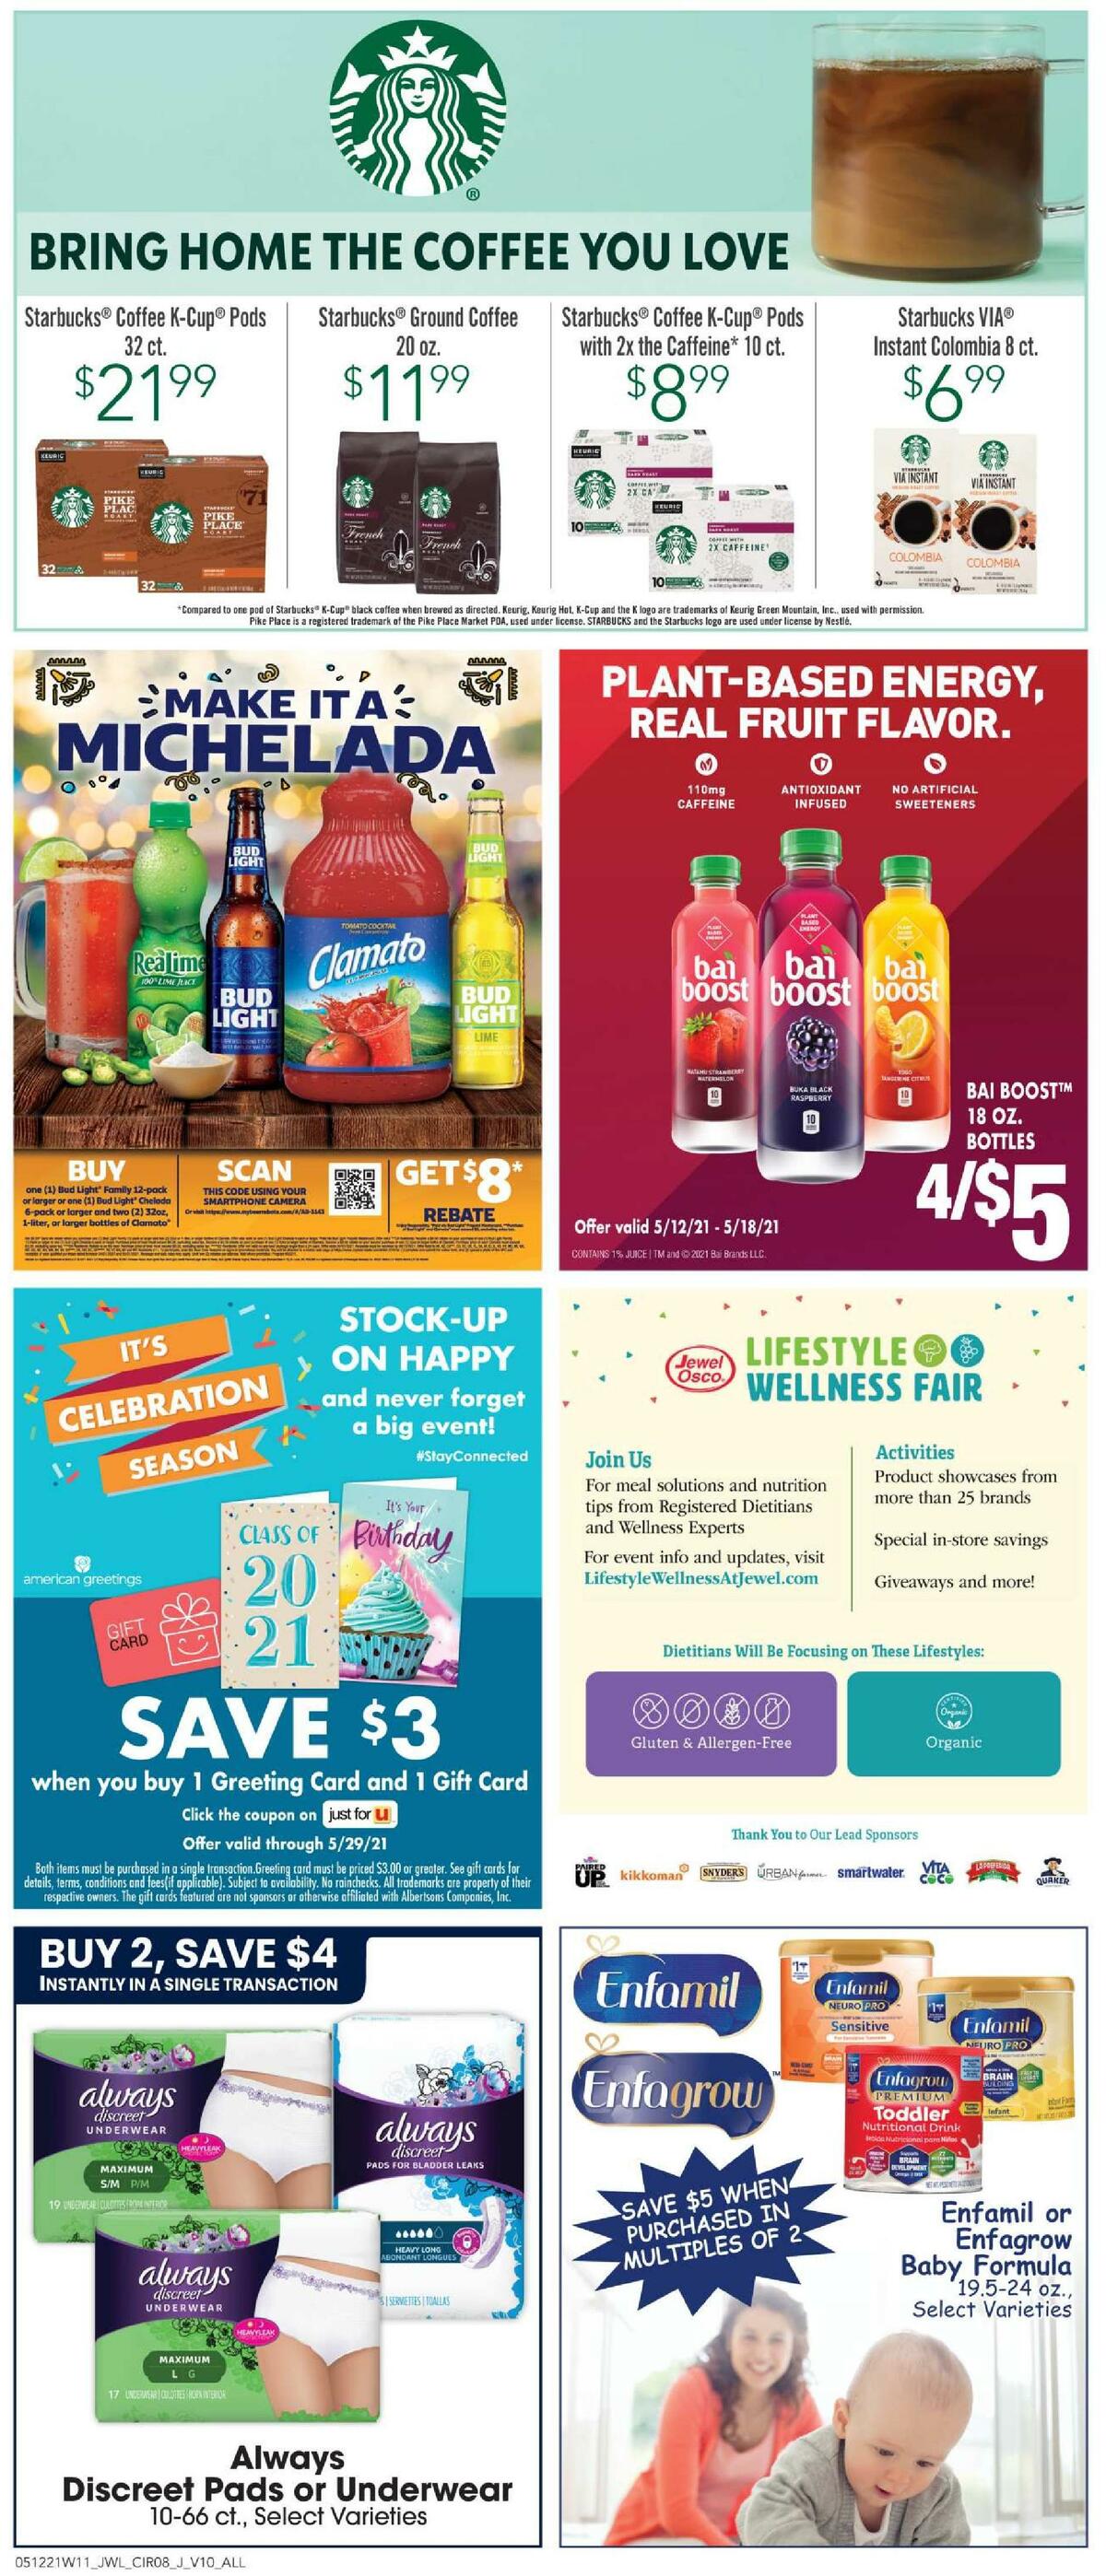 Jewel Osco Weekly Ad from May 12